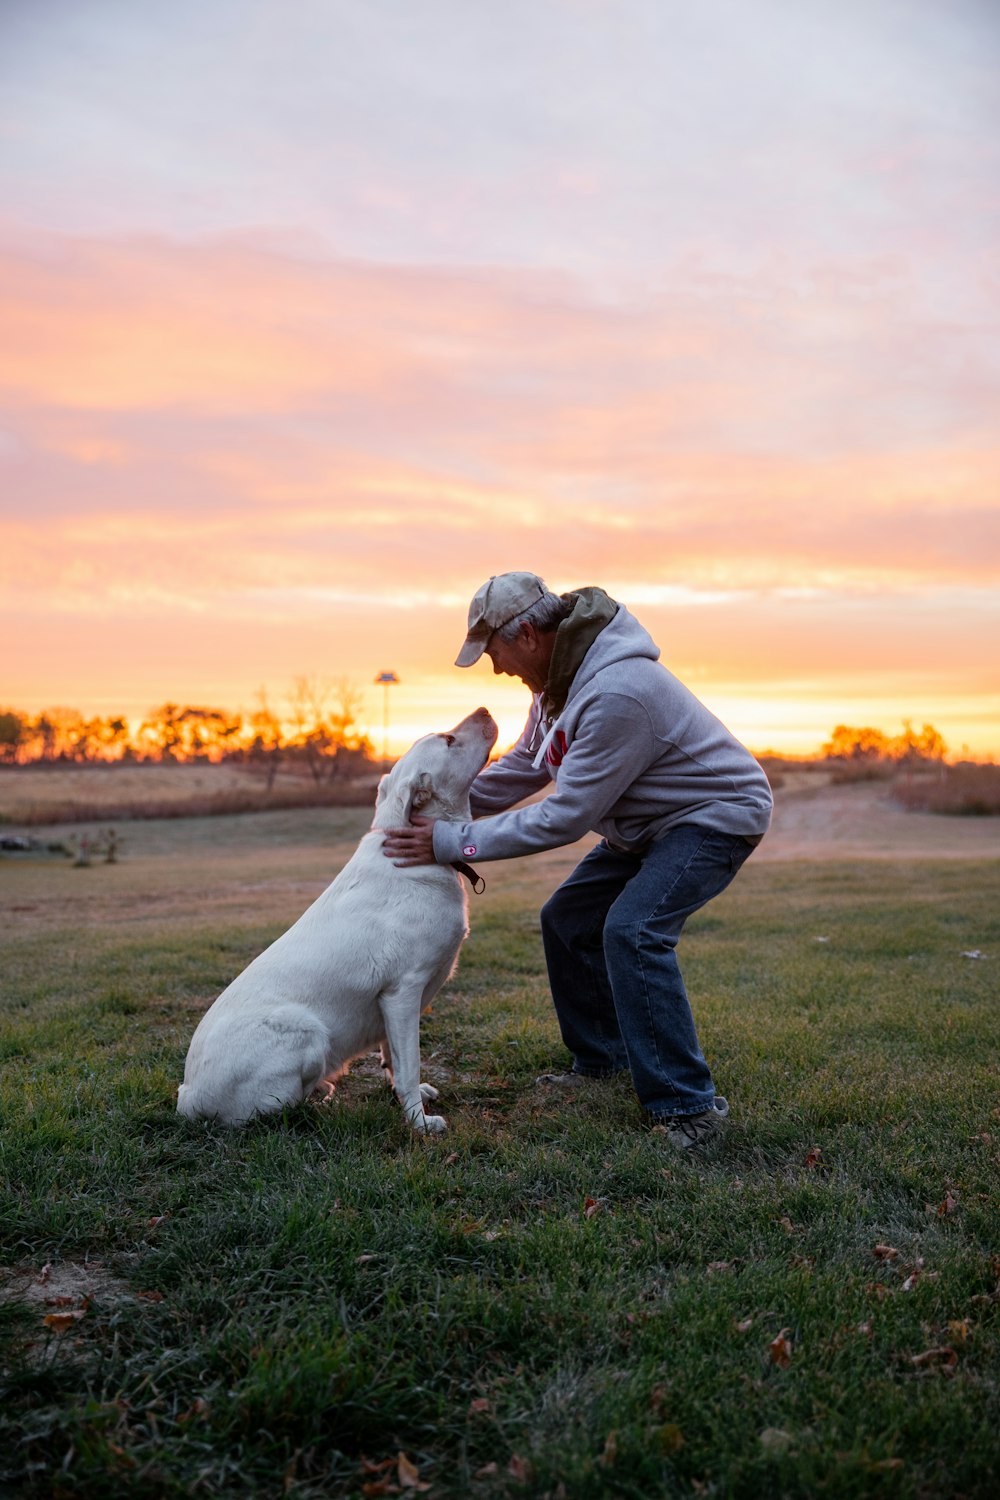 a person and a dog playing in a field